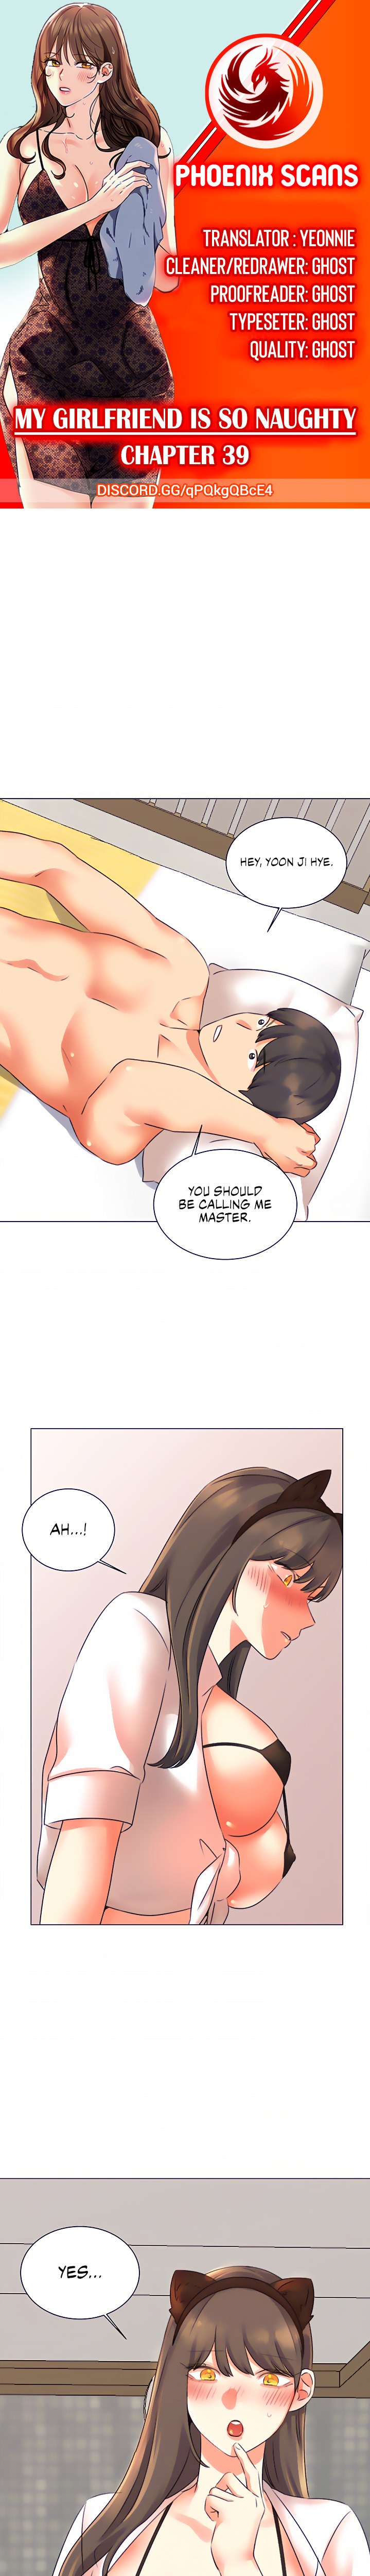 My girlfriend is so naughty - Chapter 39 Page 1